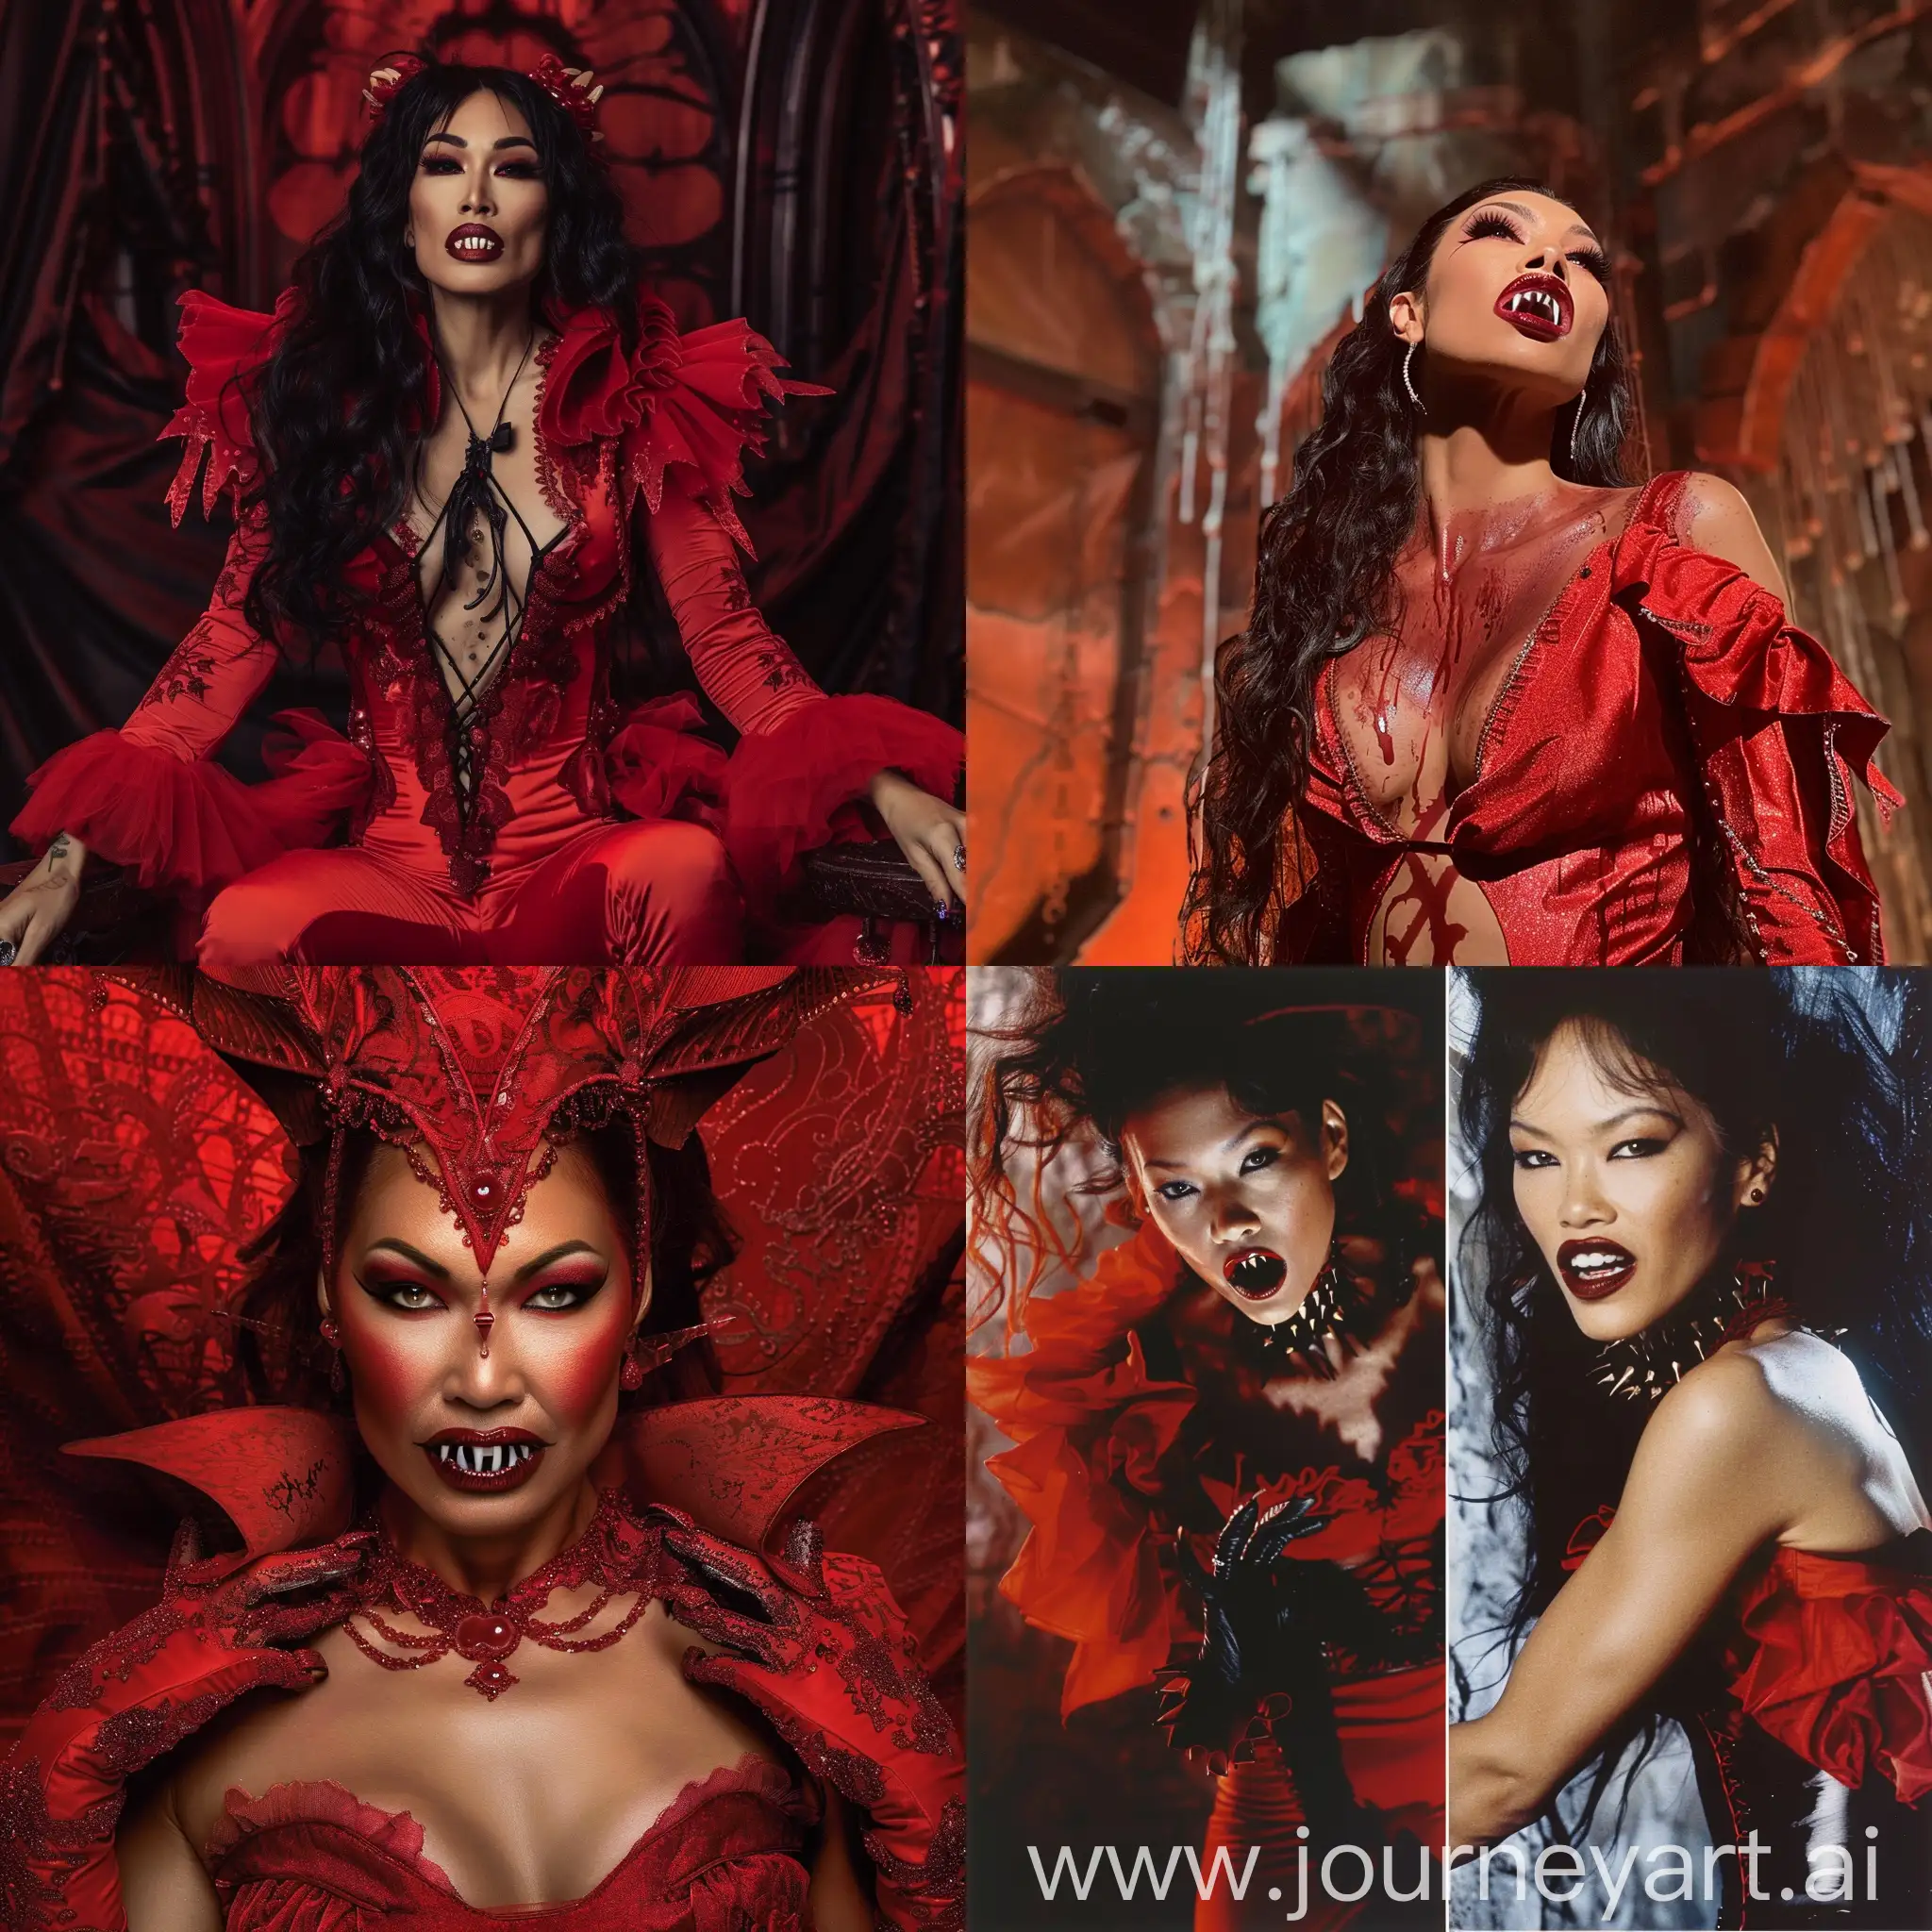 Nicole Scherzinger as a vampire queen, red outfit, fangs, Buffy style.